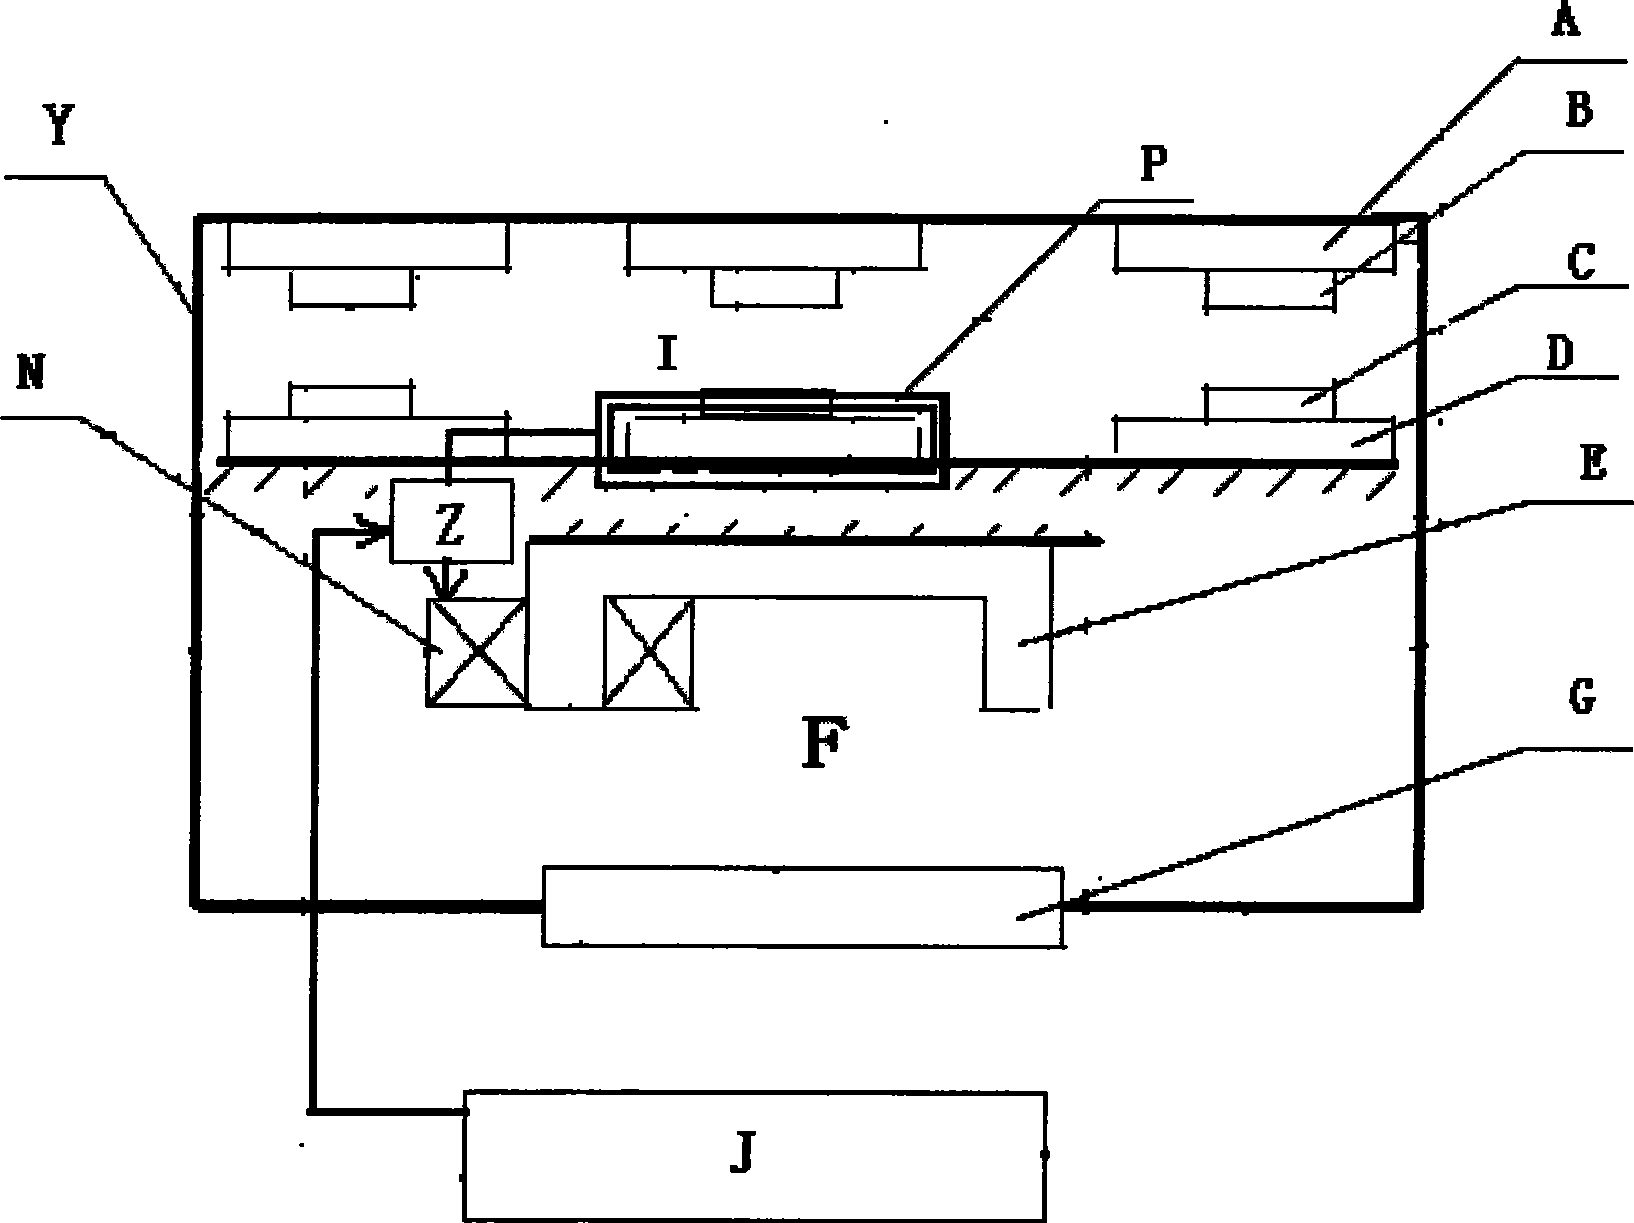 Electric appliance rapid disjunction motion mechanism based on main circuit current excitation